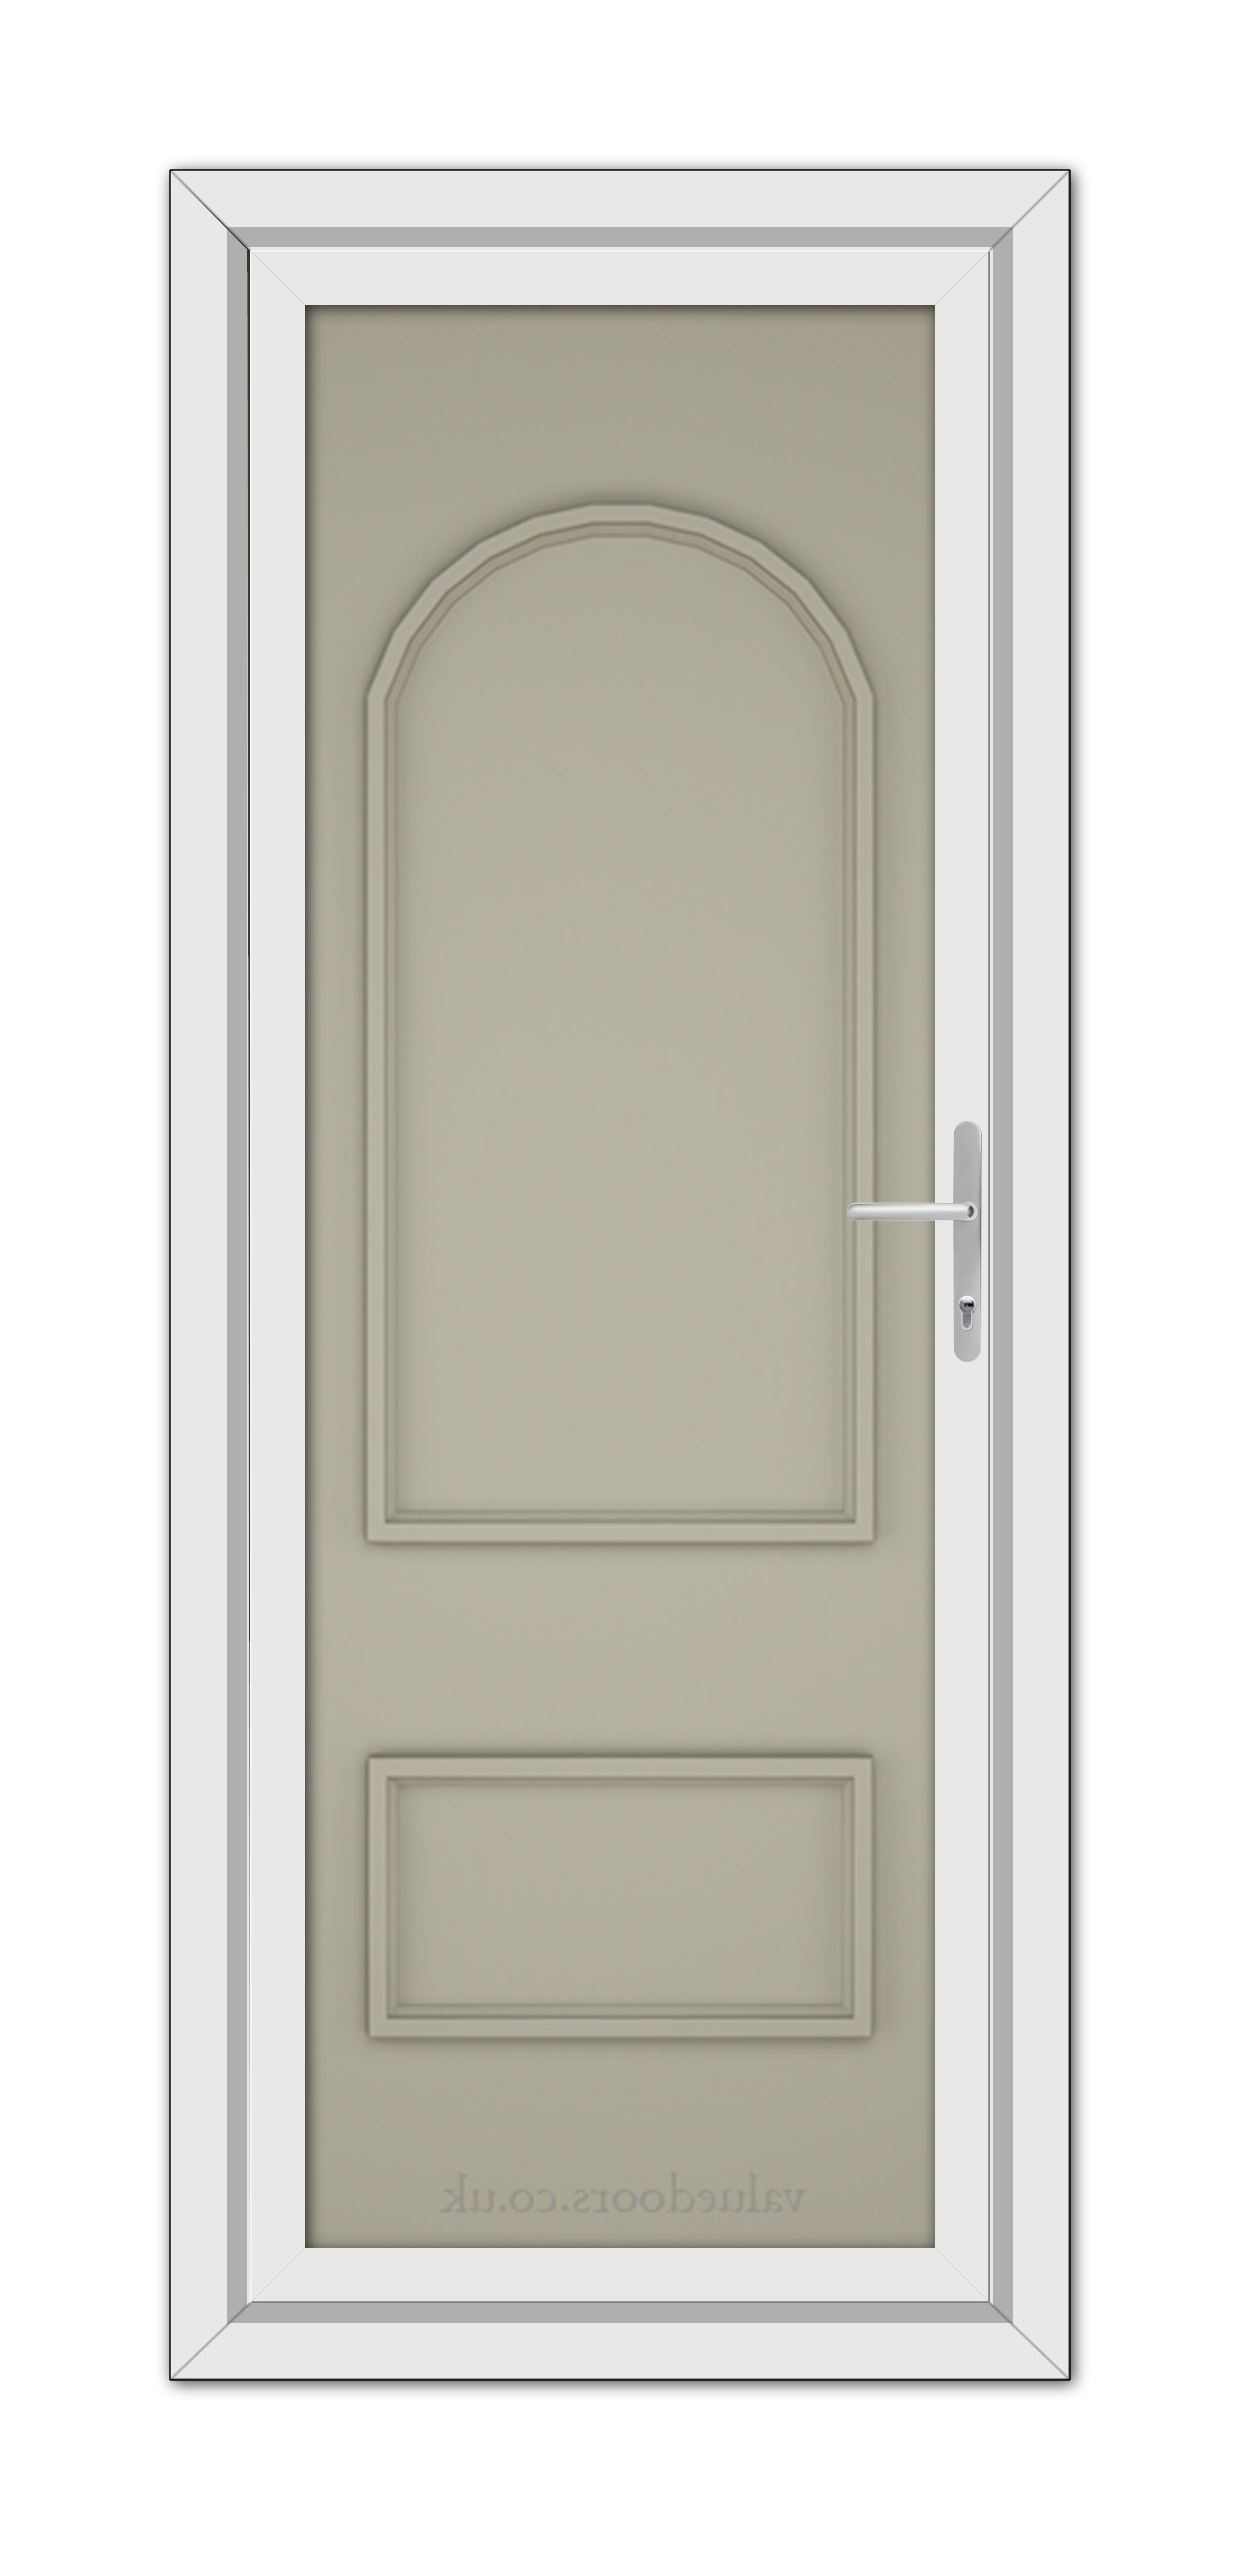 Vertical image of a closed, single Pebble Grey Rockingham Solid uPVC Door with a rectangular frame and an arched upper panel featuring a metallic handle on the right side.